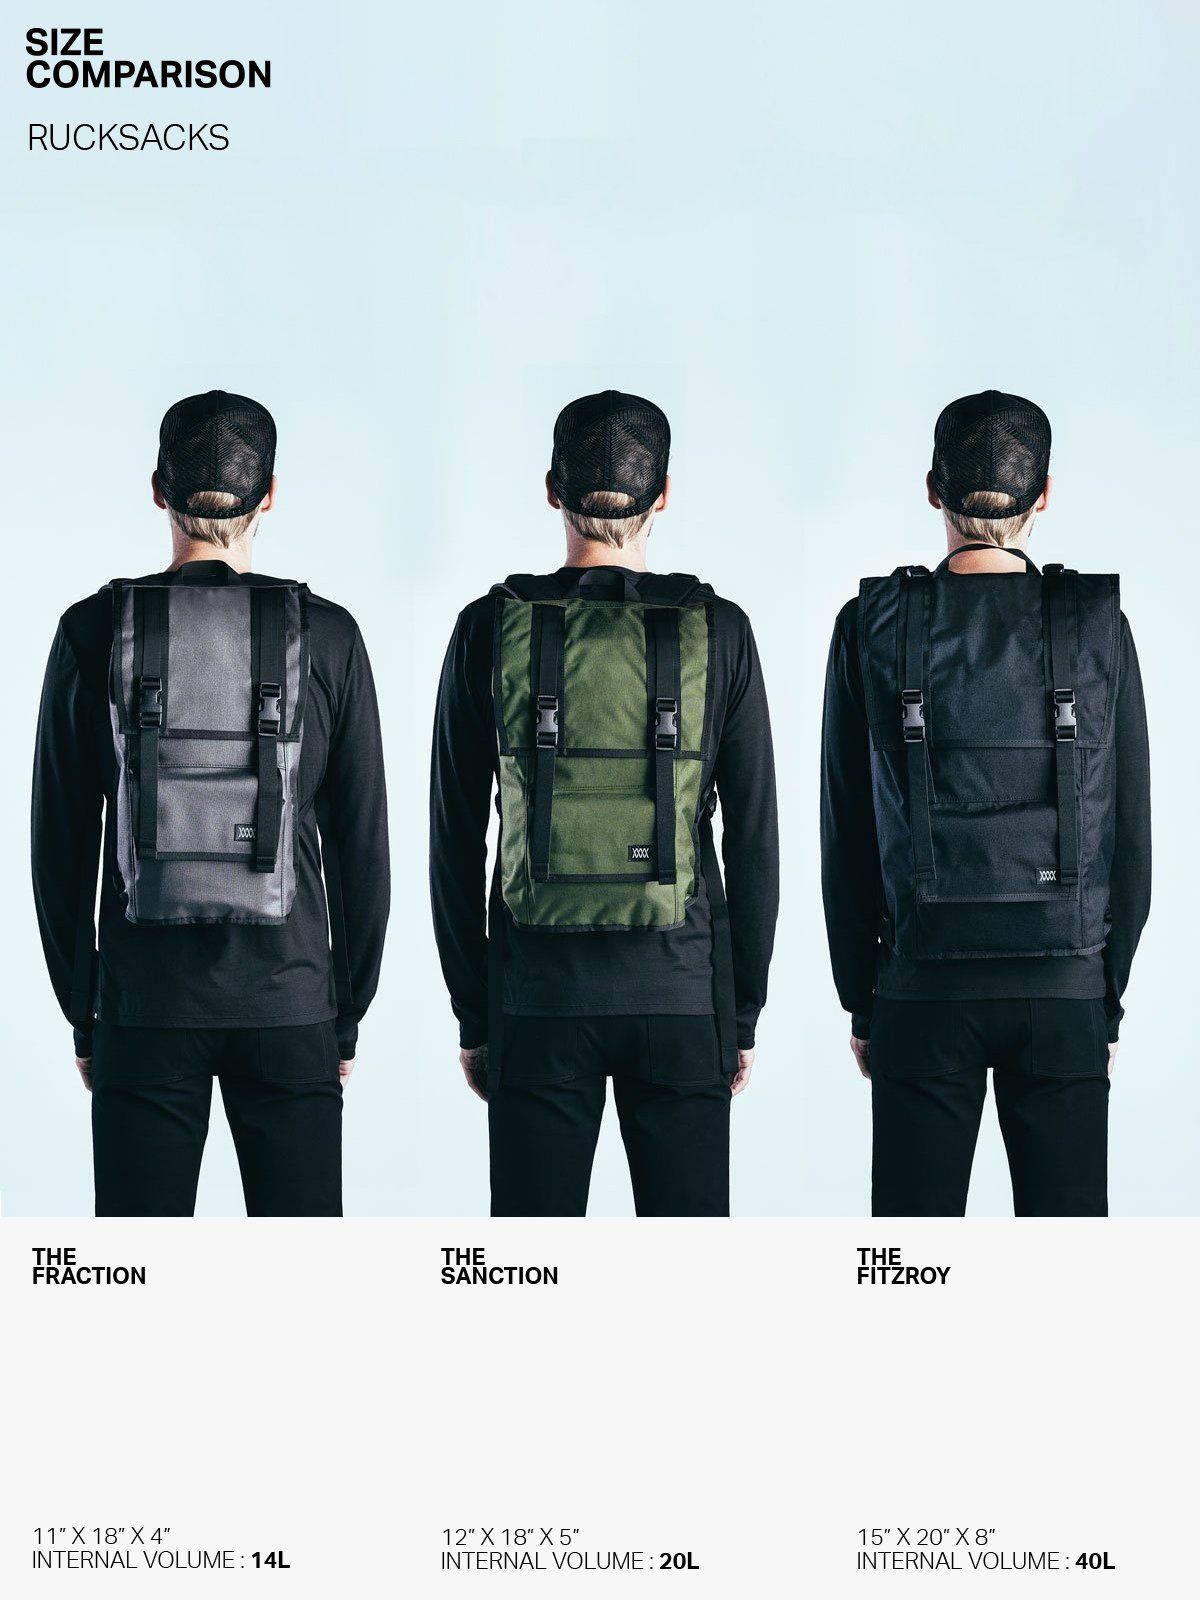 Sanction by Mission Workshop - Weatherproof Bags & Technical Apparel - San Francisco & Los Angeles - Built to endure - Guaranteed forever